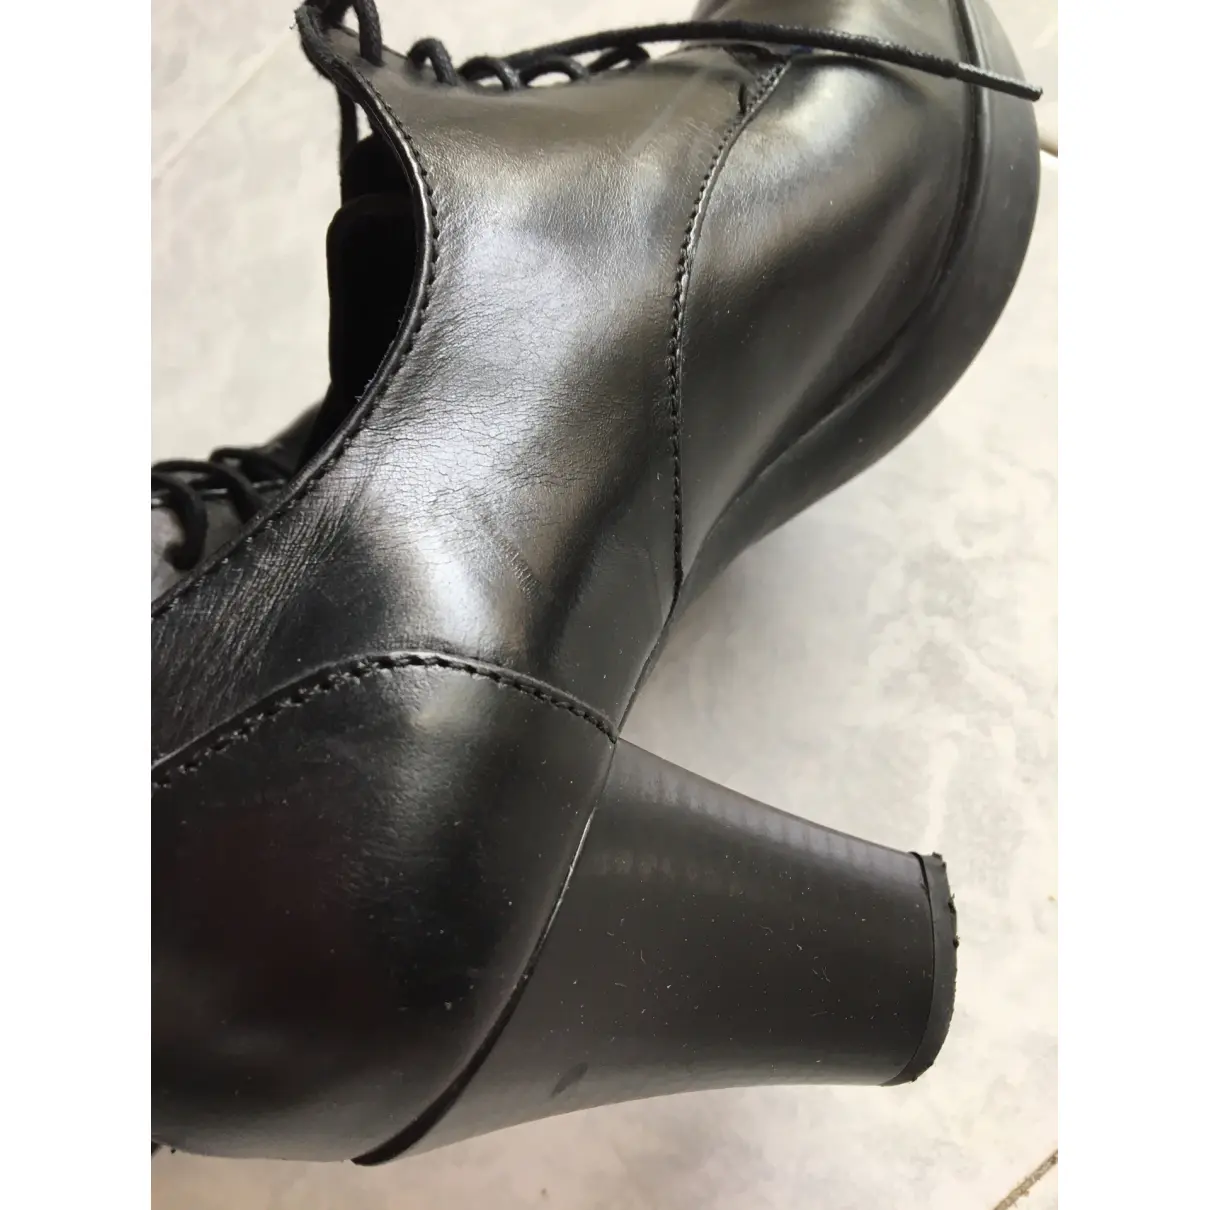 Buy Callaghan Leather ankle boots online